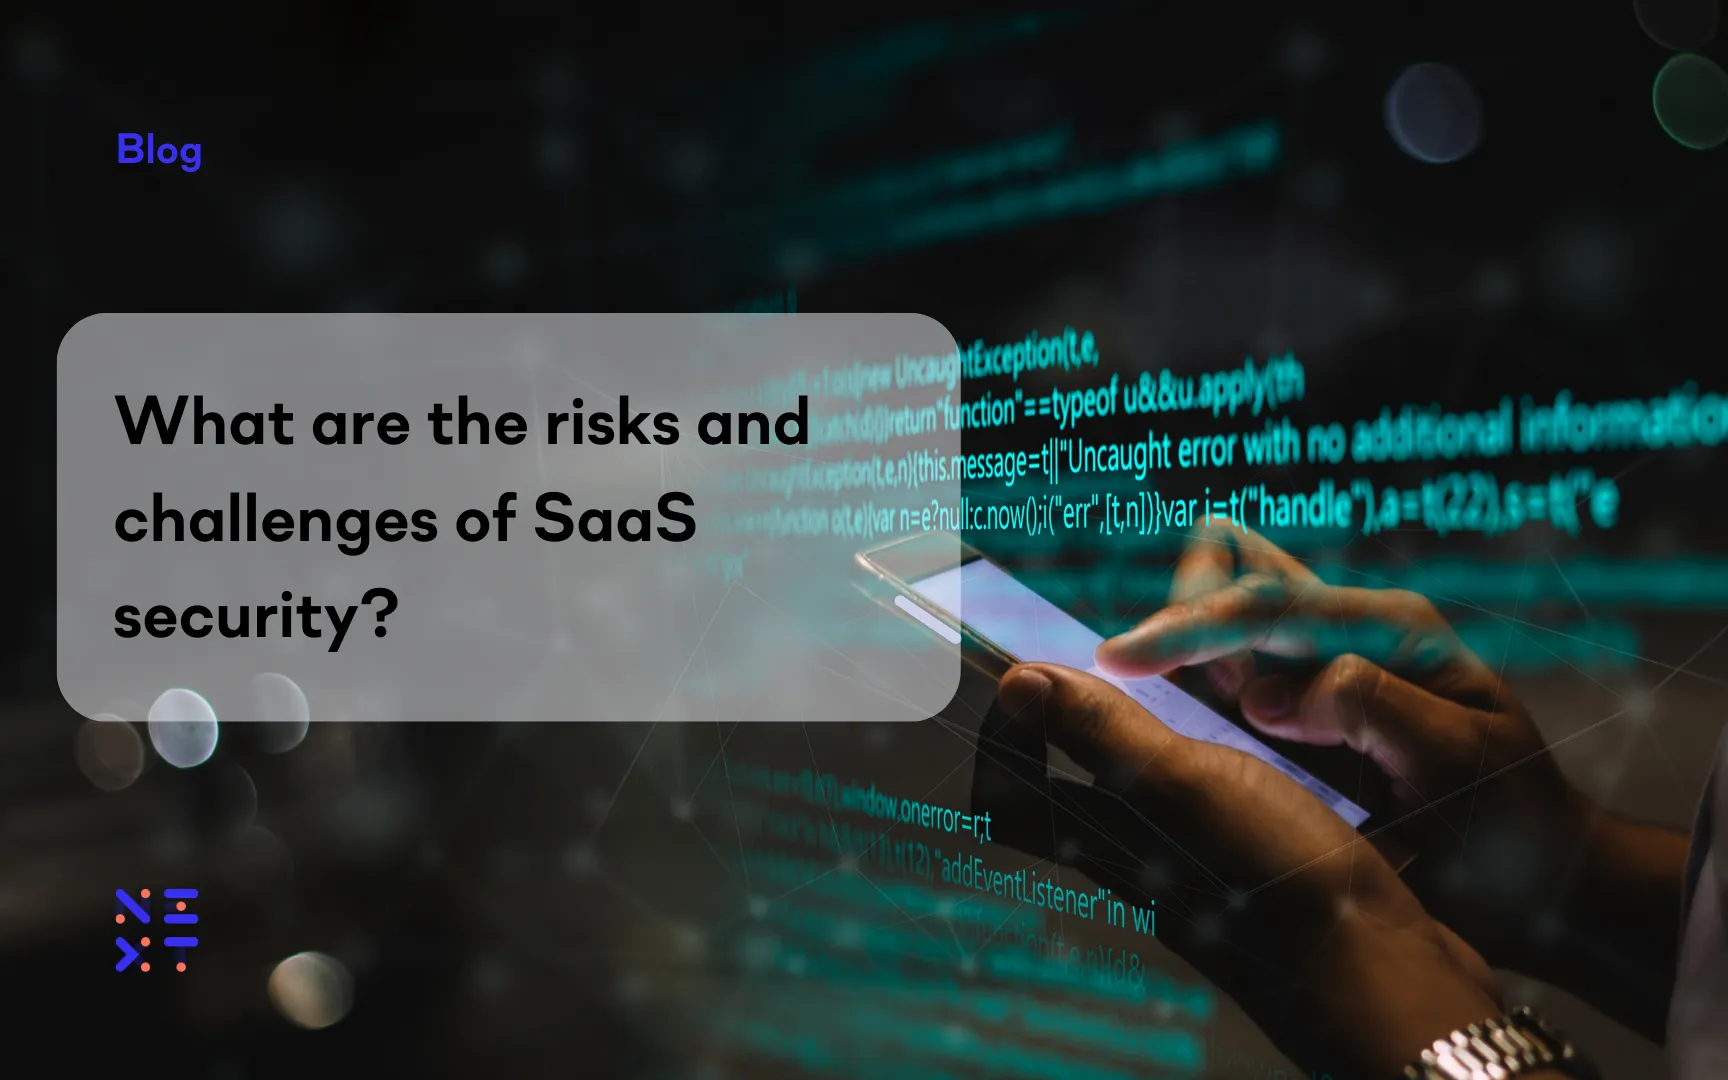 What are the risks and challenges of SaaS security?